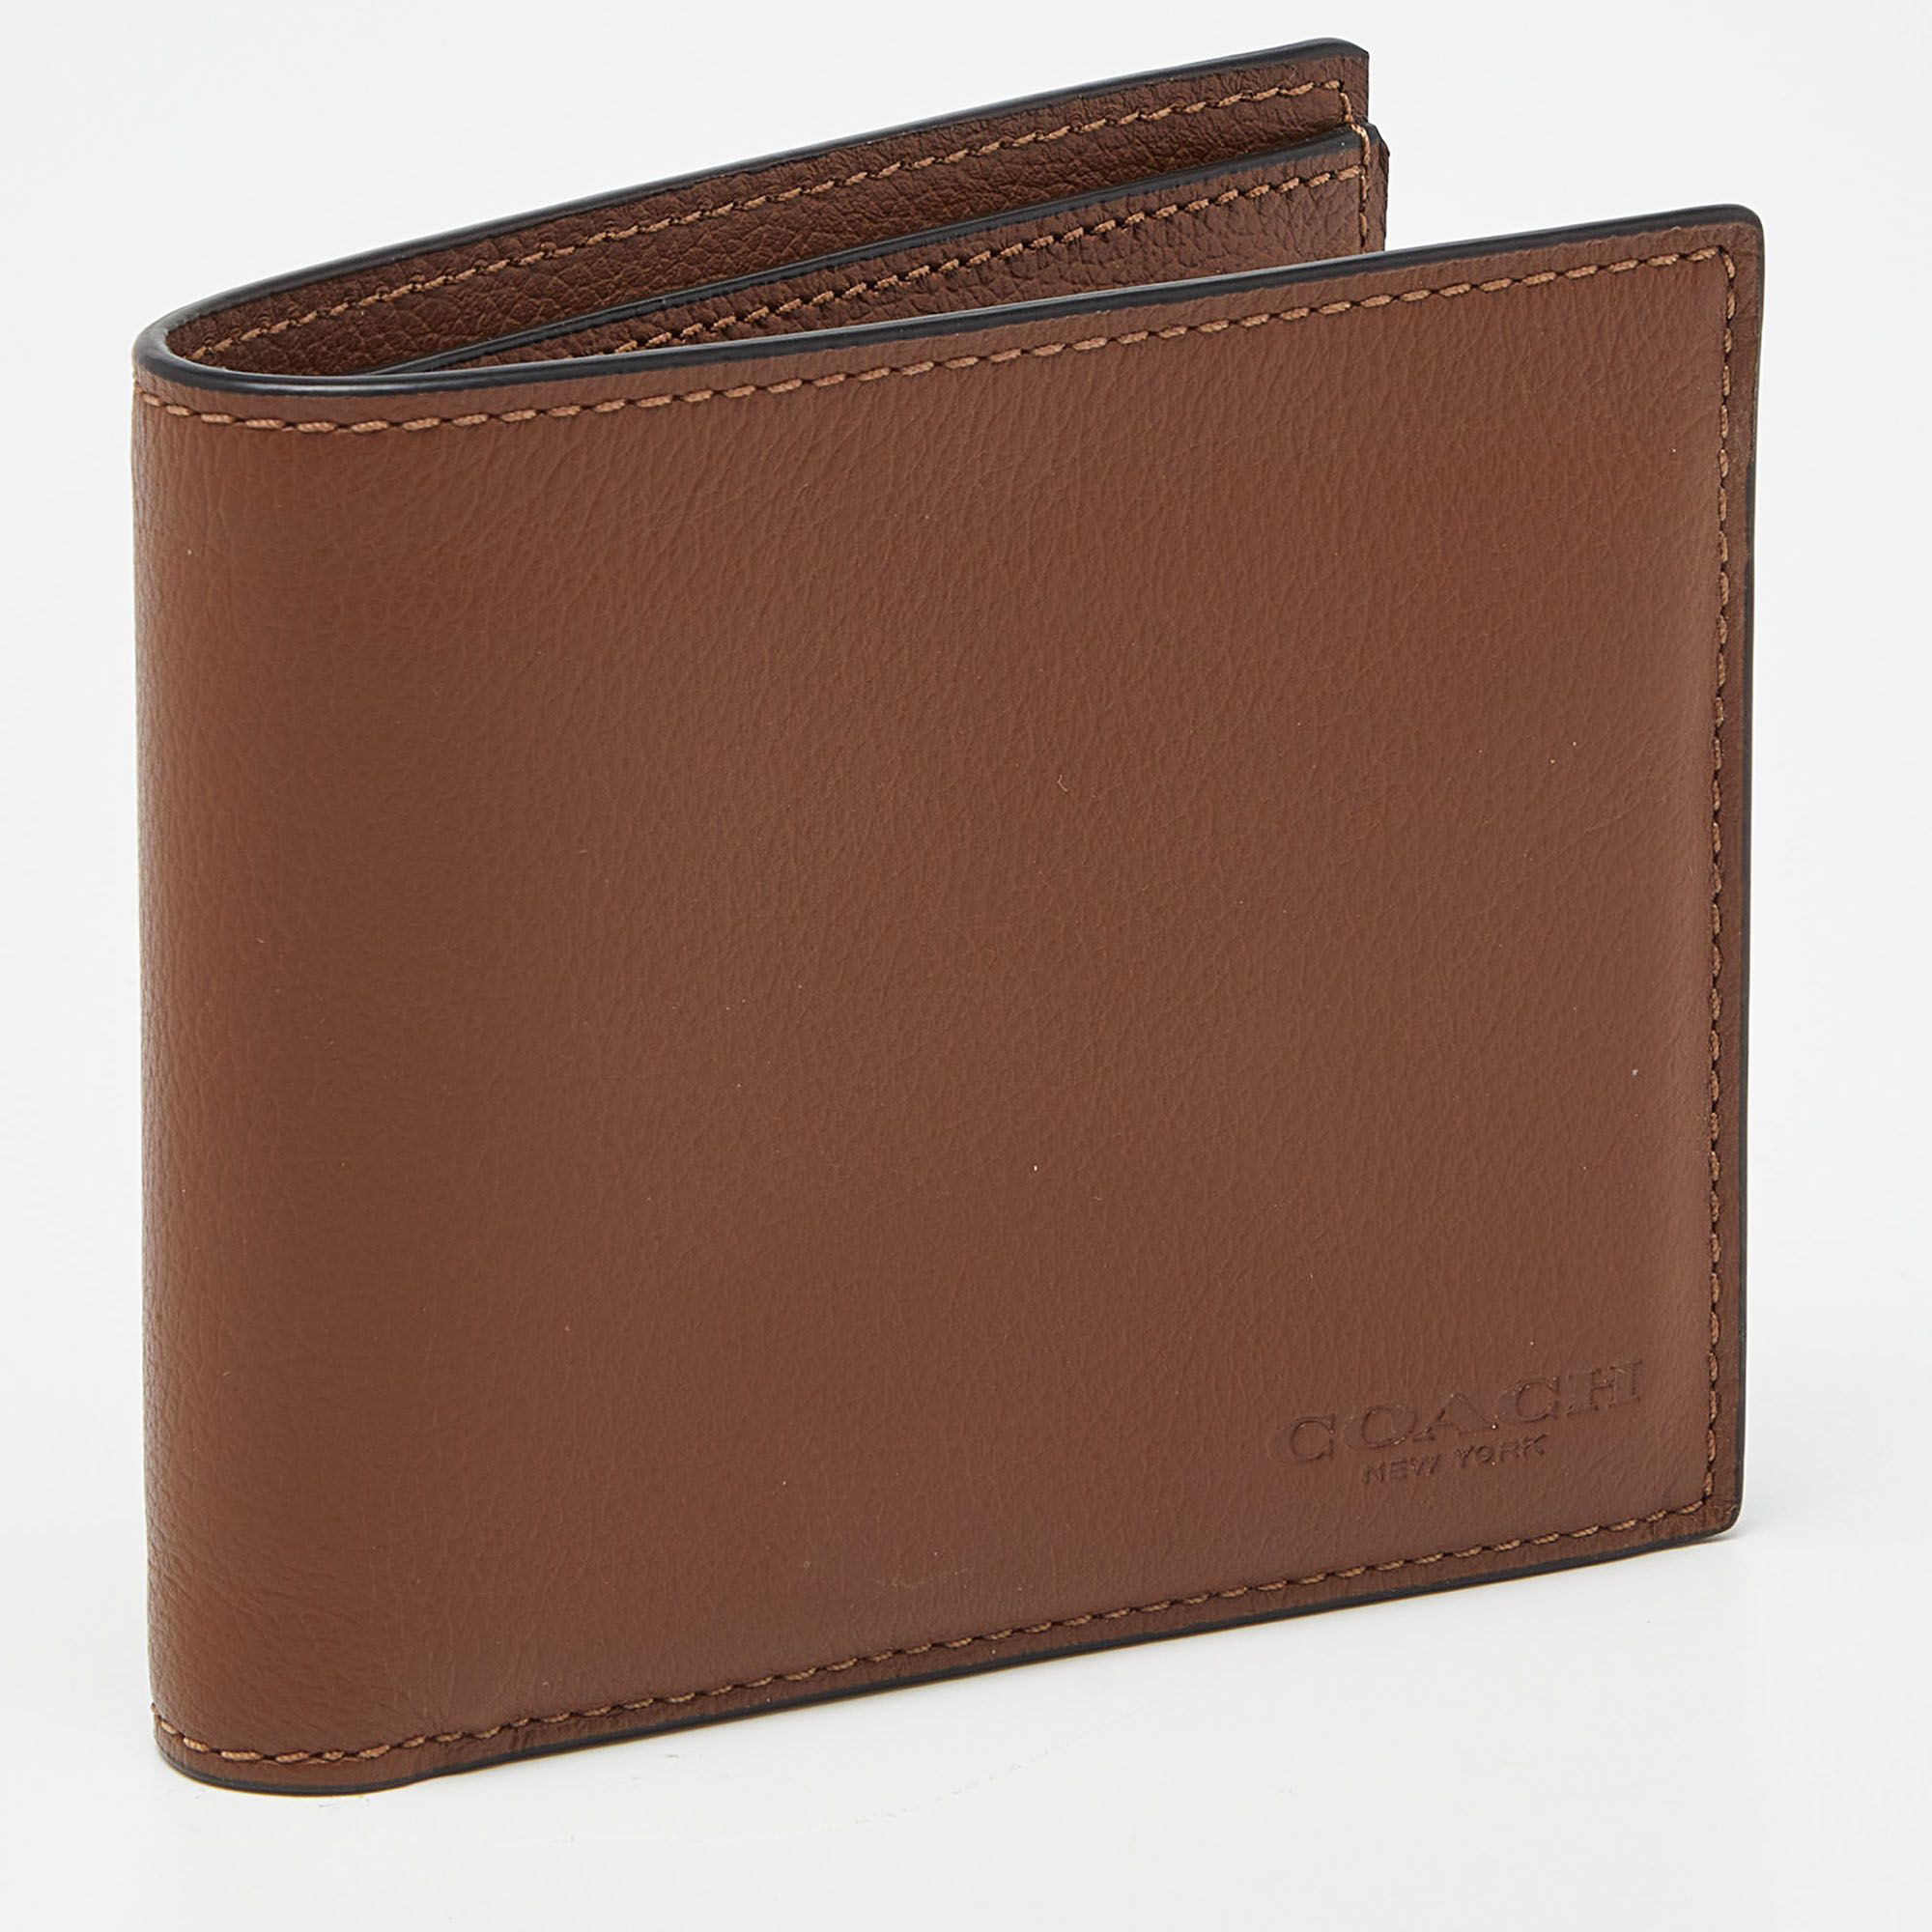 Coach Brown Leather Bifold Wallet